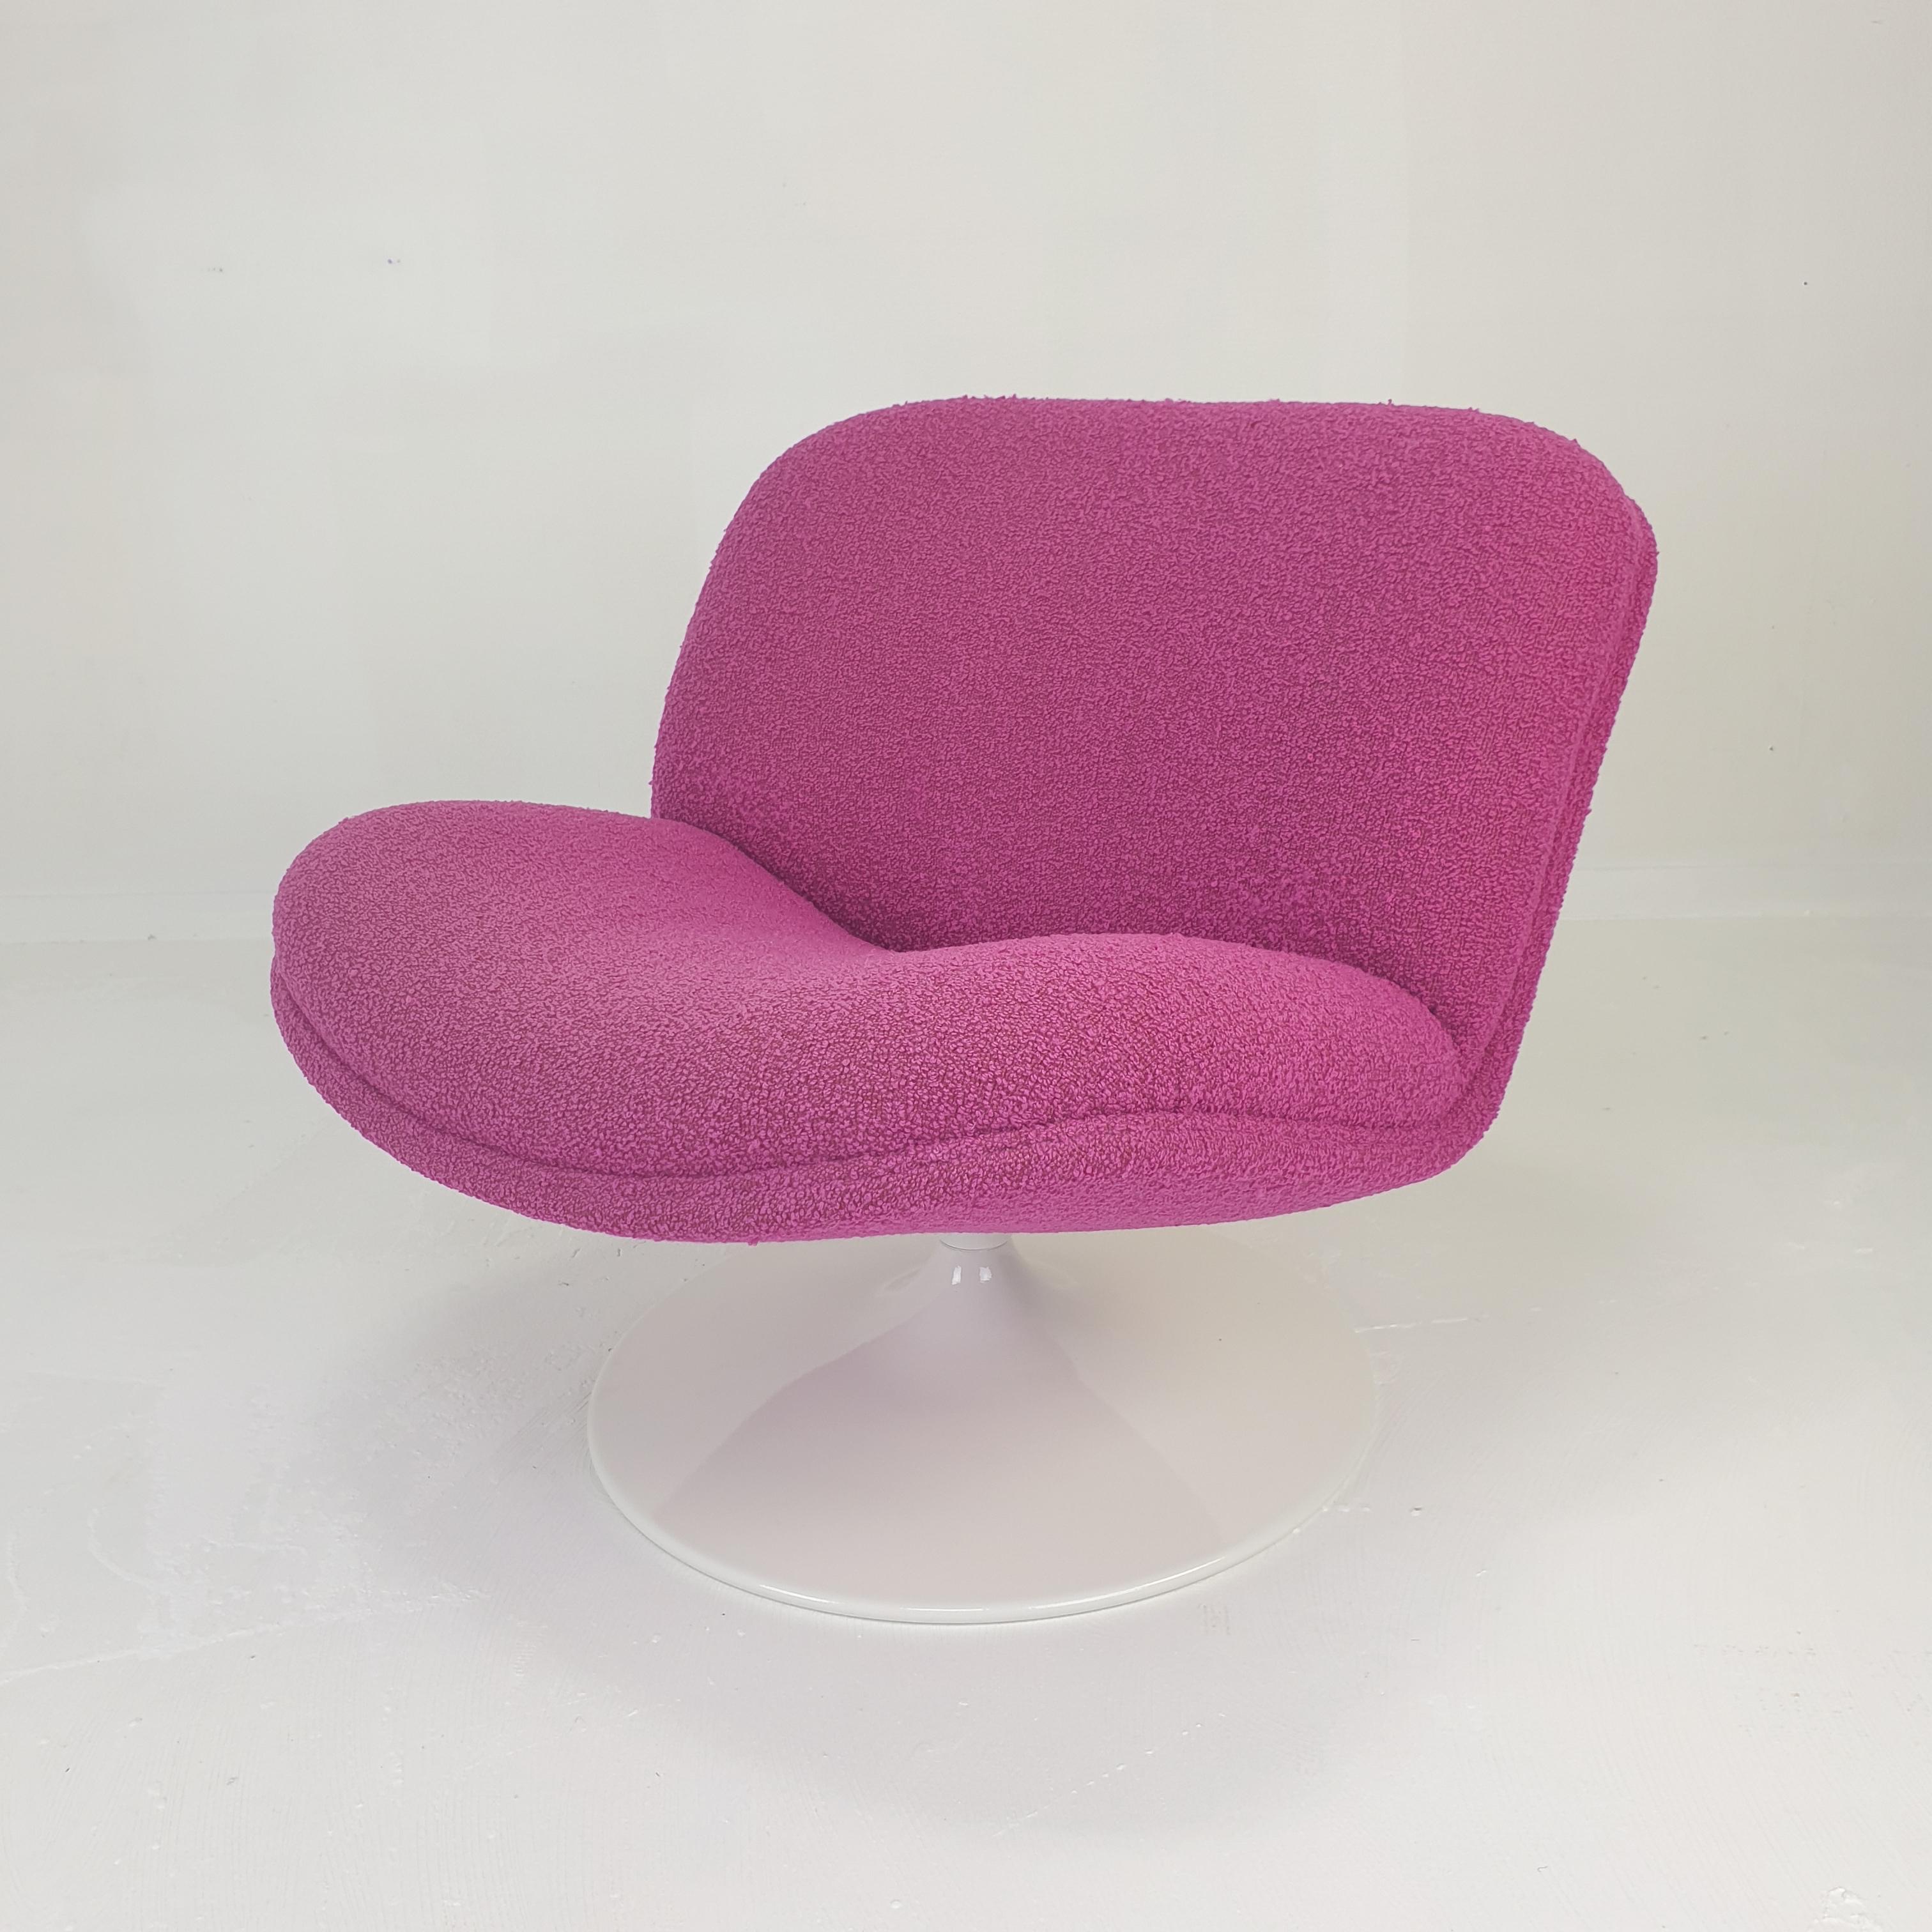 Very cute and comfortable Lounge Chair designed by Geoffrey Harcourt for Artifort in the 70's.
It has a rotating metal foot. 

It has just been reupholstered with lovely bouclé fabric and the foot has been painted.